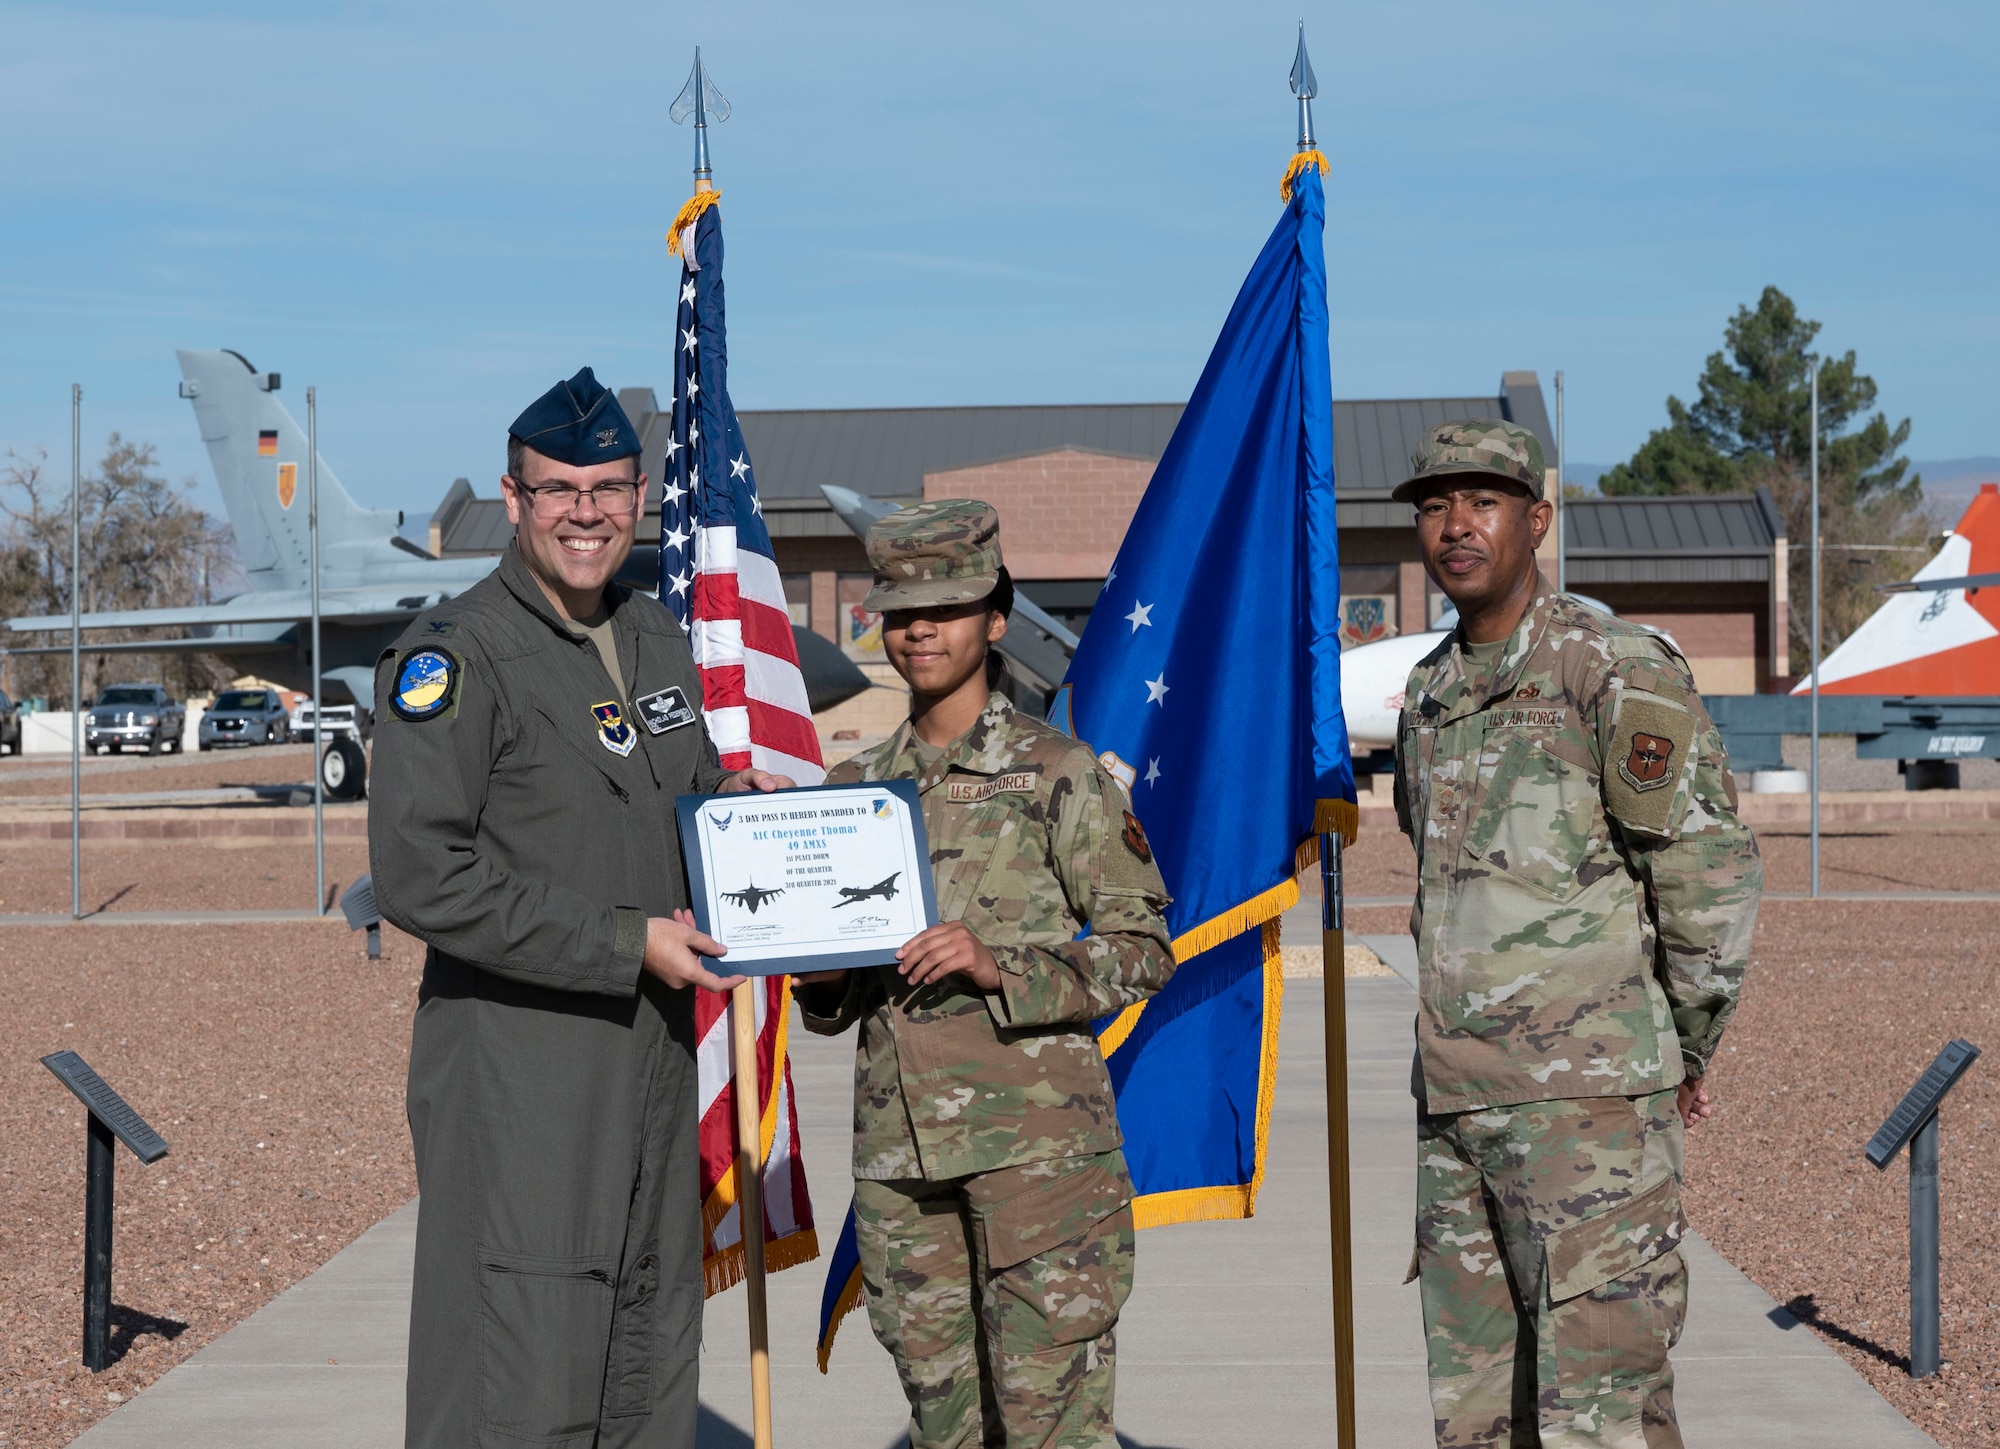 Airman 1st Class Cheyenne Thomas, quarterly award winner, accepts the Dorm of the quarter award during the 49th Wing’s 3rd quarter award ceremony, Nov. 19, 2021, on Holloman Air Force Base, New Mexico. Quarterly award winners were selected based on their technical expertise, demonstration of leadership and job performance. (U.S. Air Force photo by Airman 1st Class Antonio Salfran)